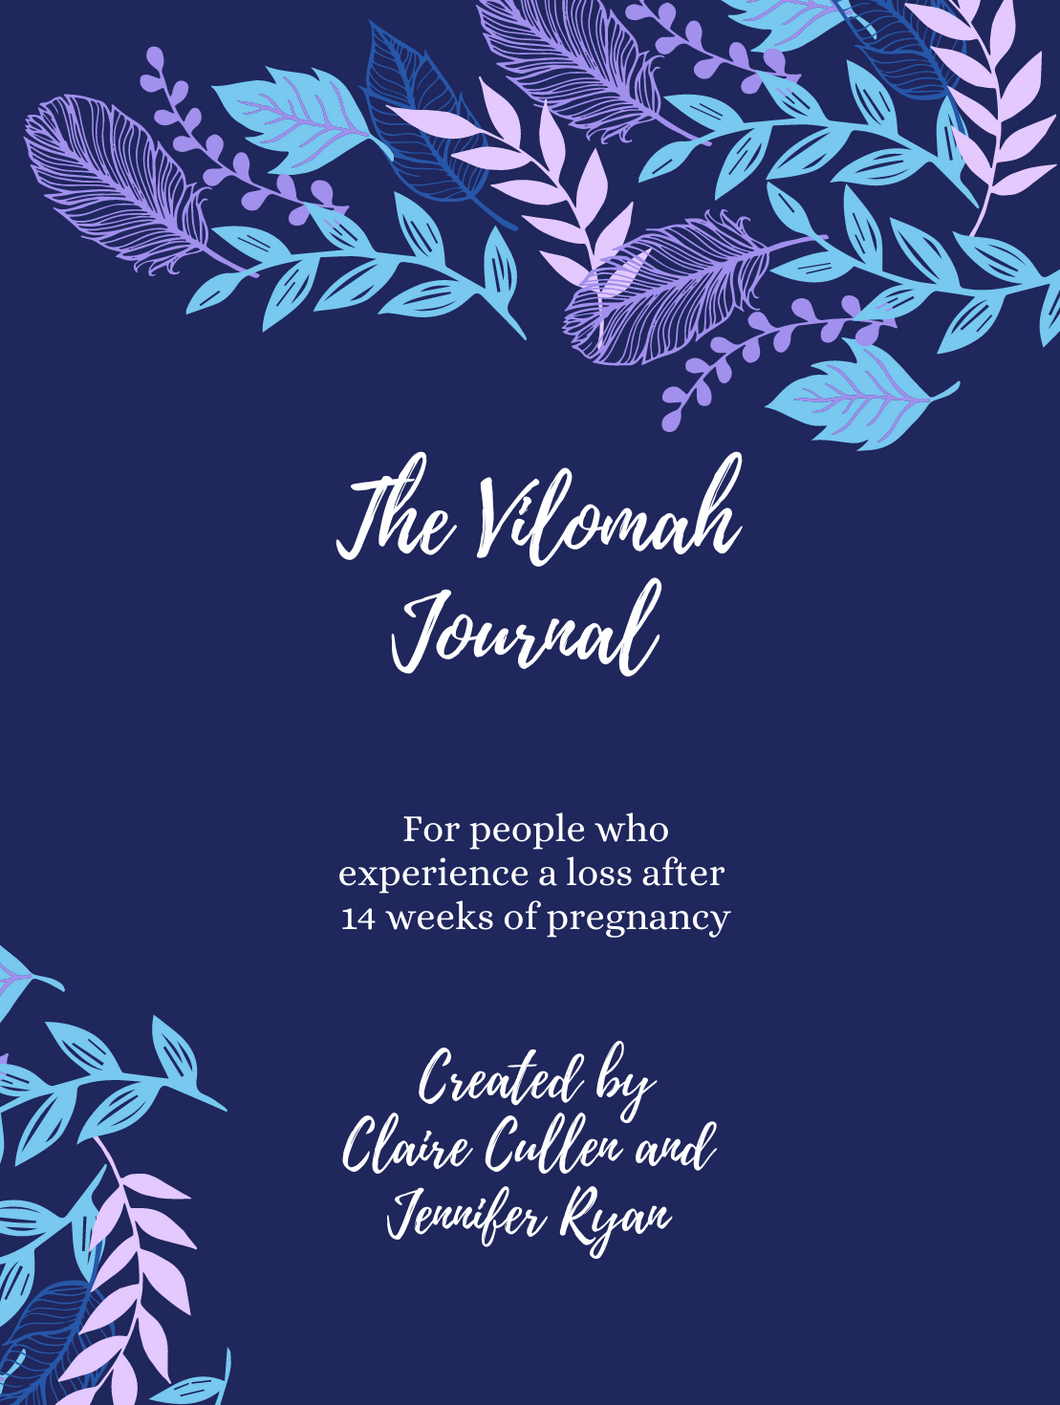 The Vilomah Pregnancy Loss Journal: For people experiencing a loss in pregnancy after 14 weeks